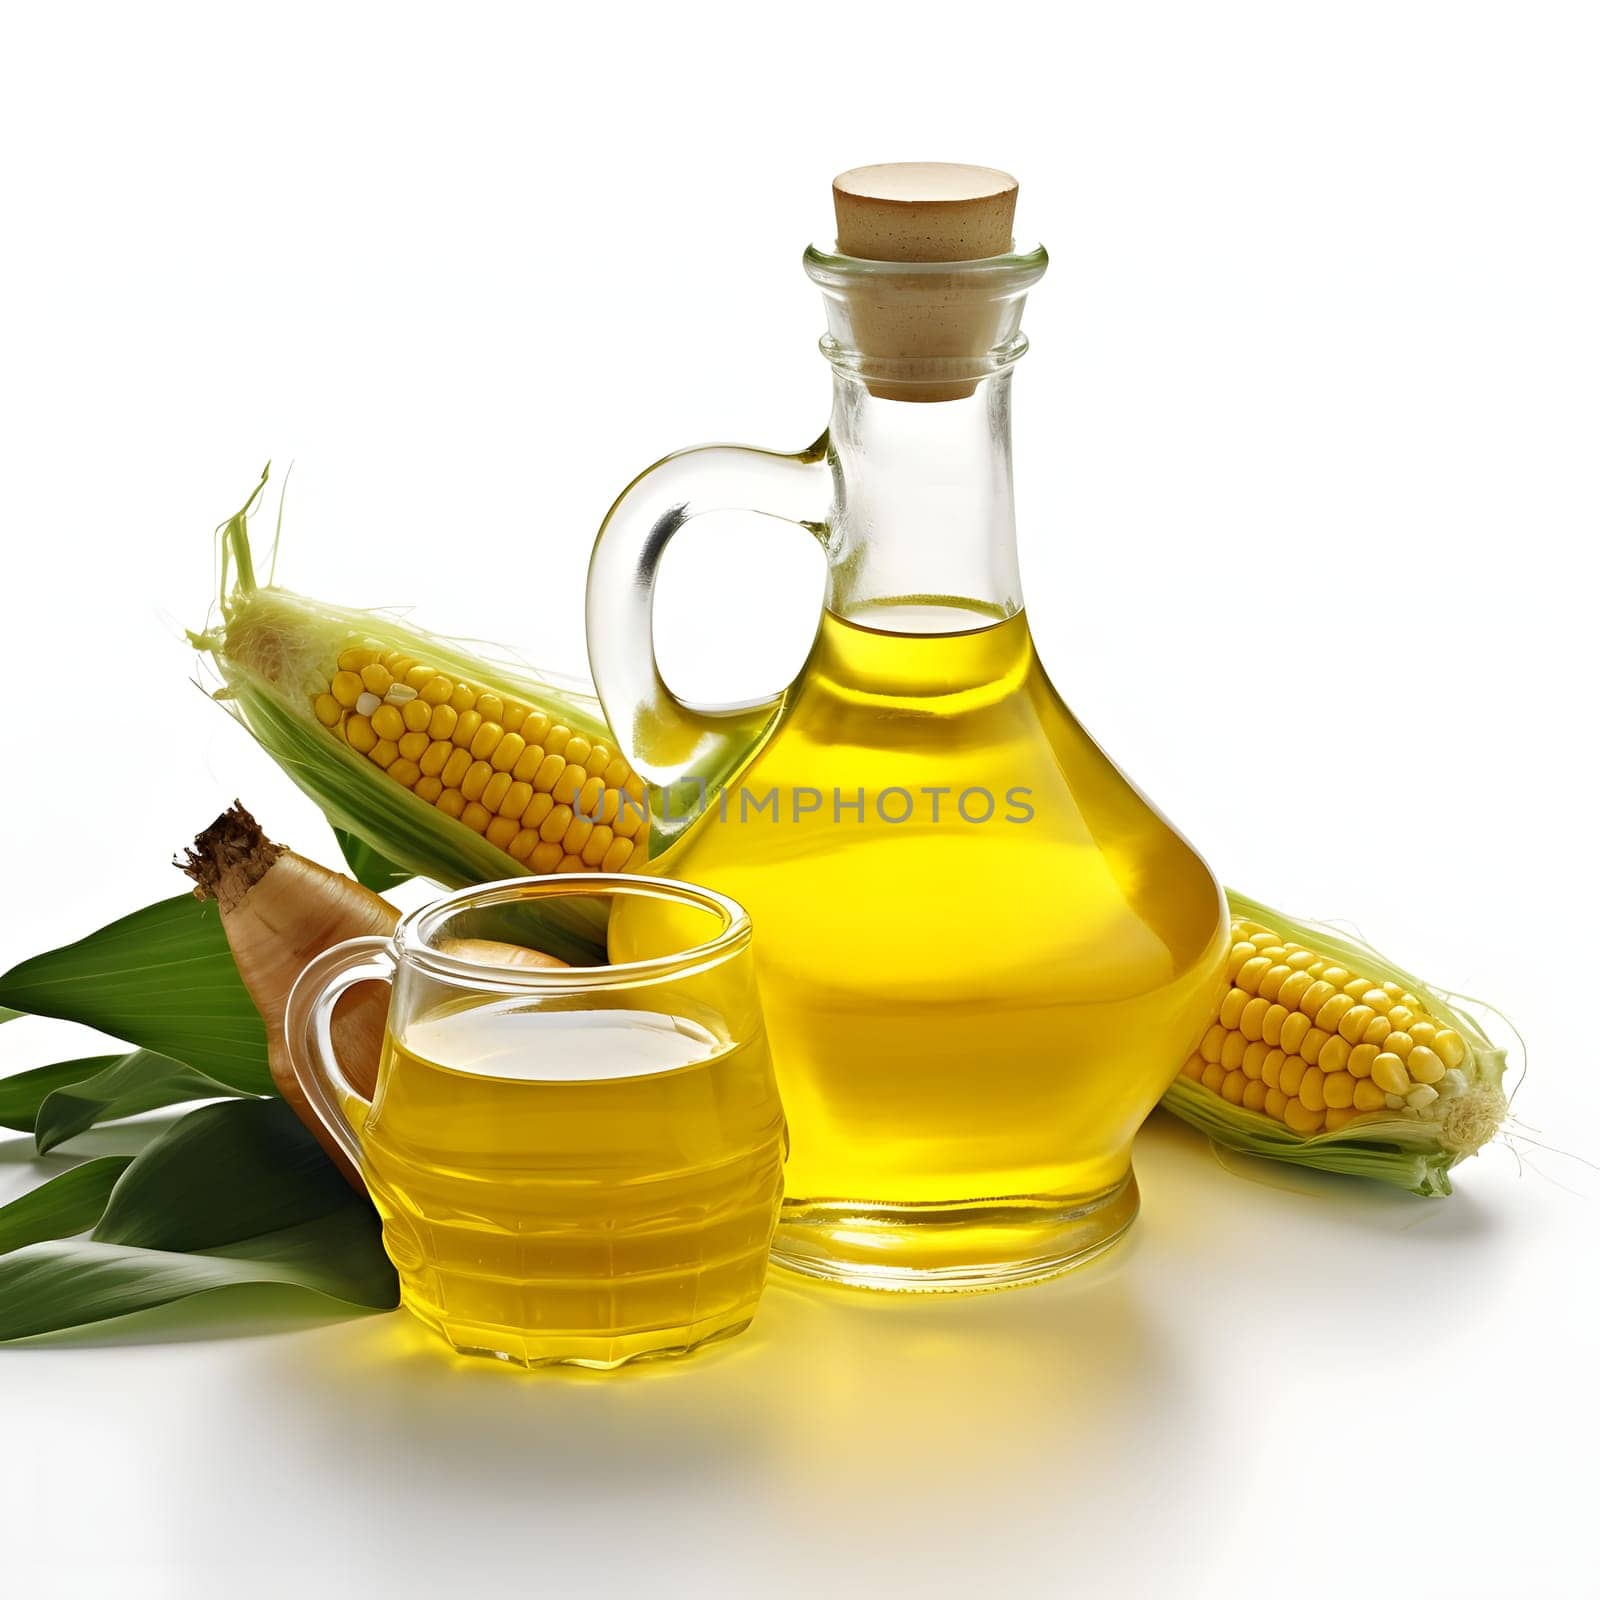 Oil in a glass container and corn cobs with leaves. Corn as a dish of thanksgiving for the harvest, a picture on a white isolated background. An atmosphere of joy and celebration.